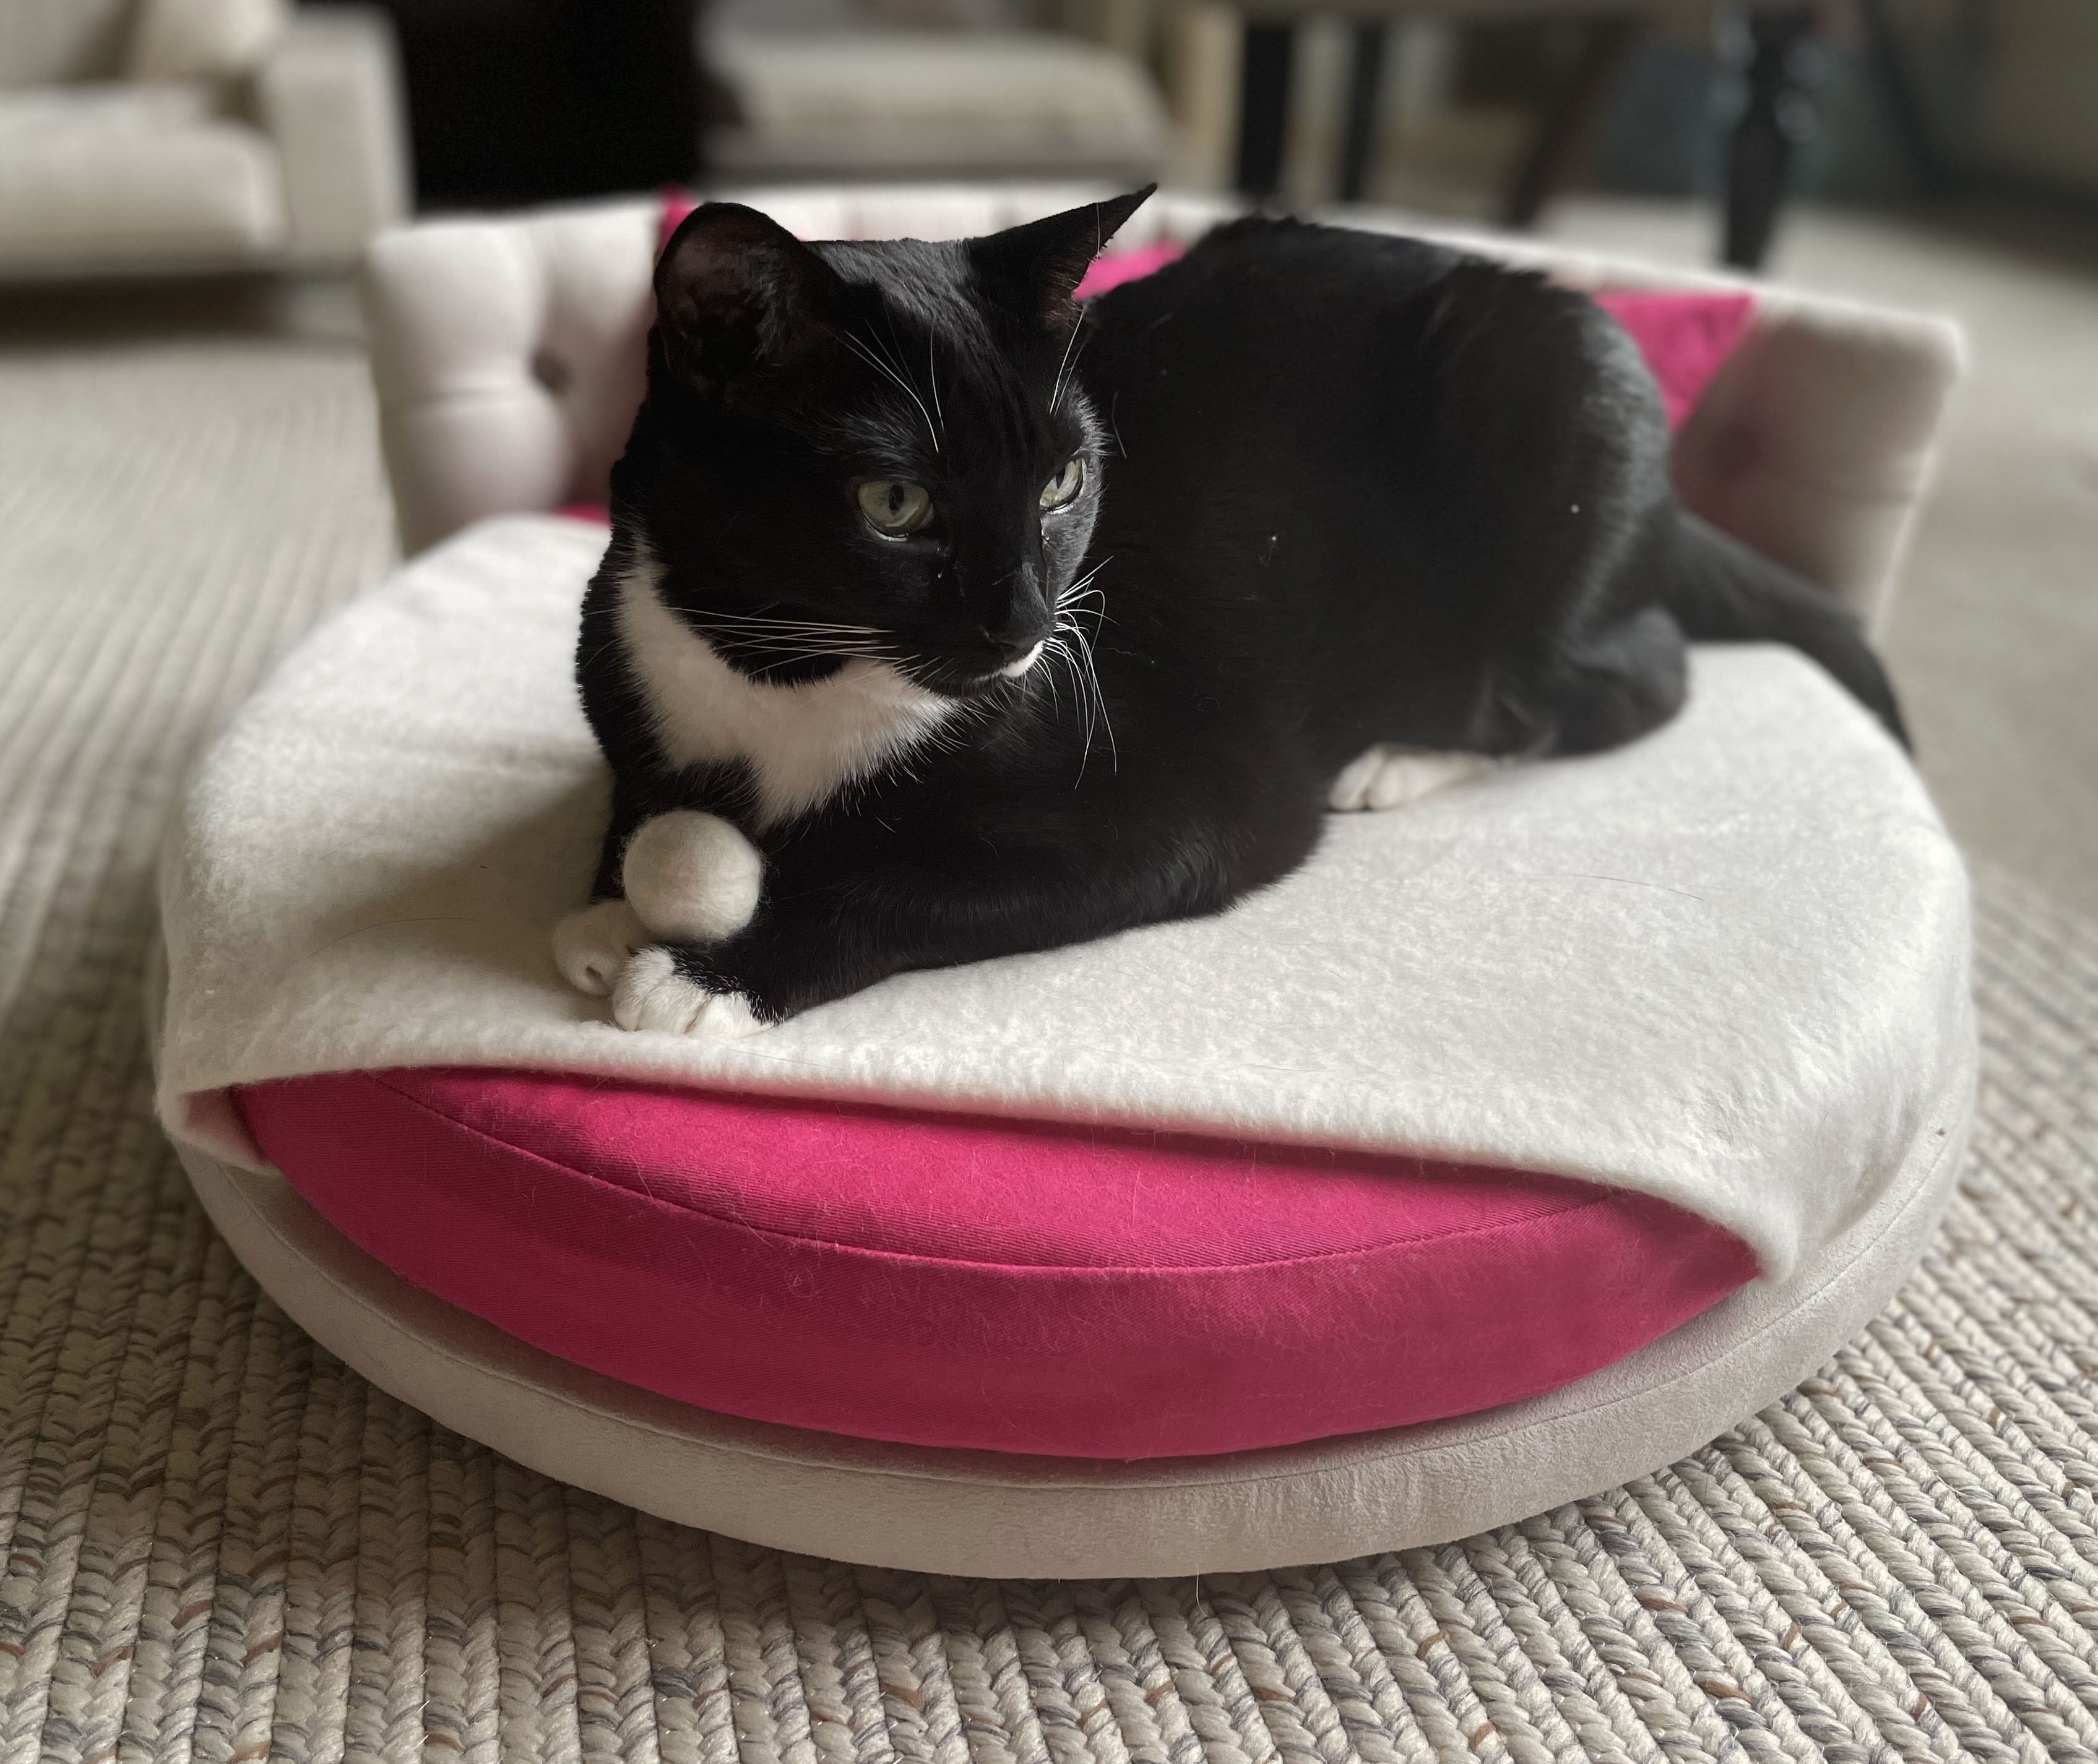 CatsEssentials’ Sophisticated Cat Furnishings Feature Eco-Friendly Furniture Paired with Luxurious Organic Bedding